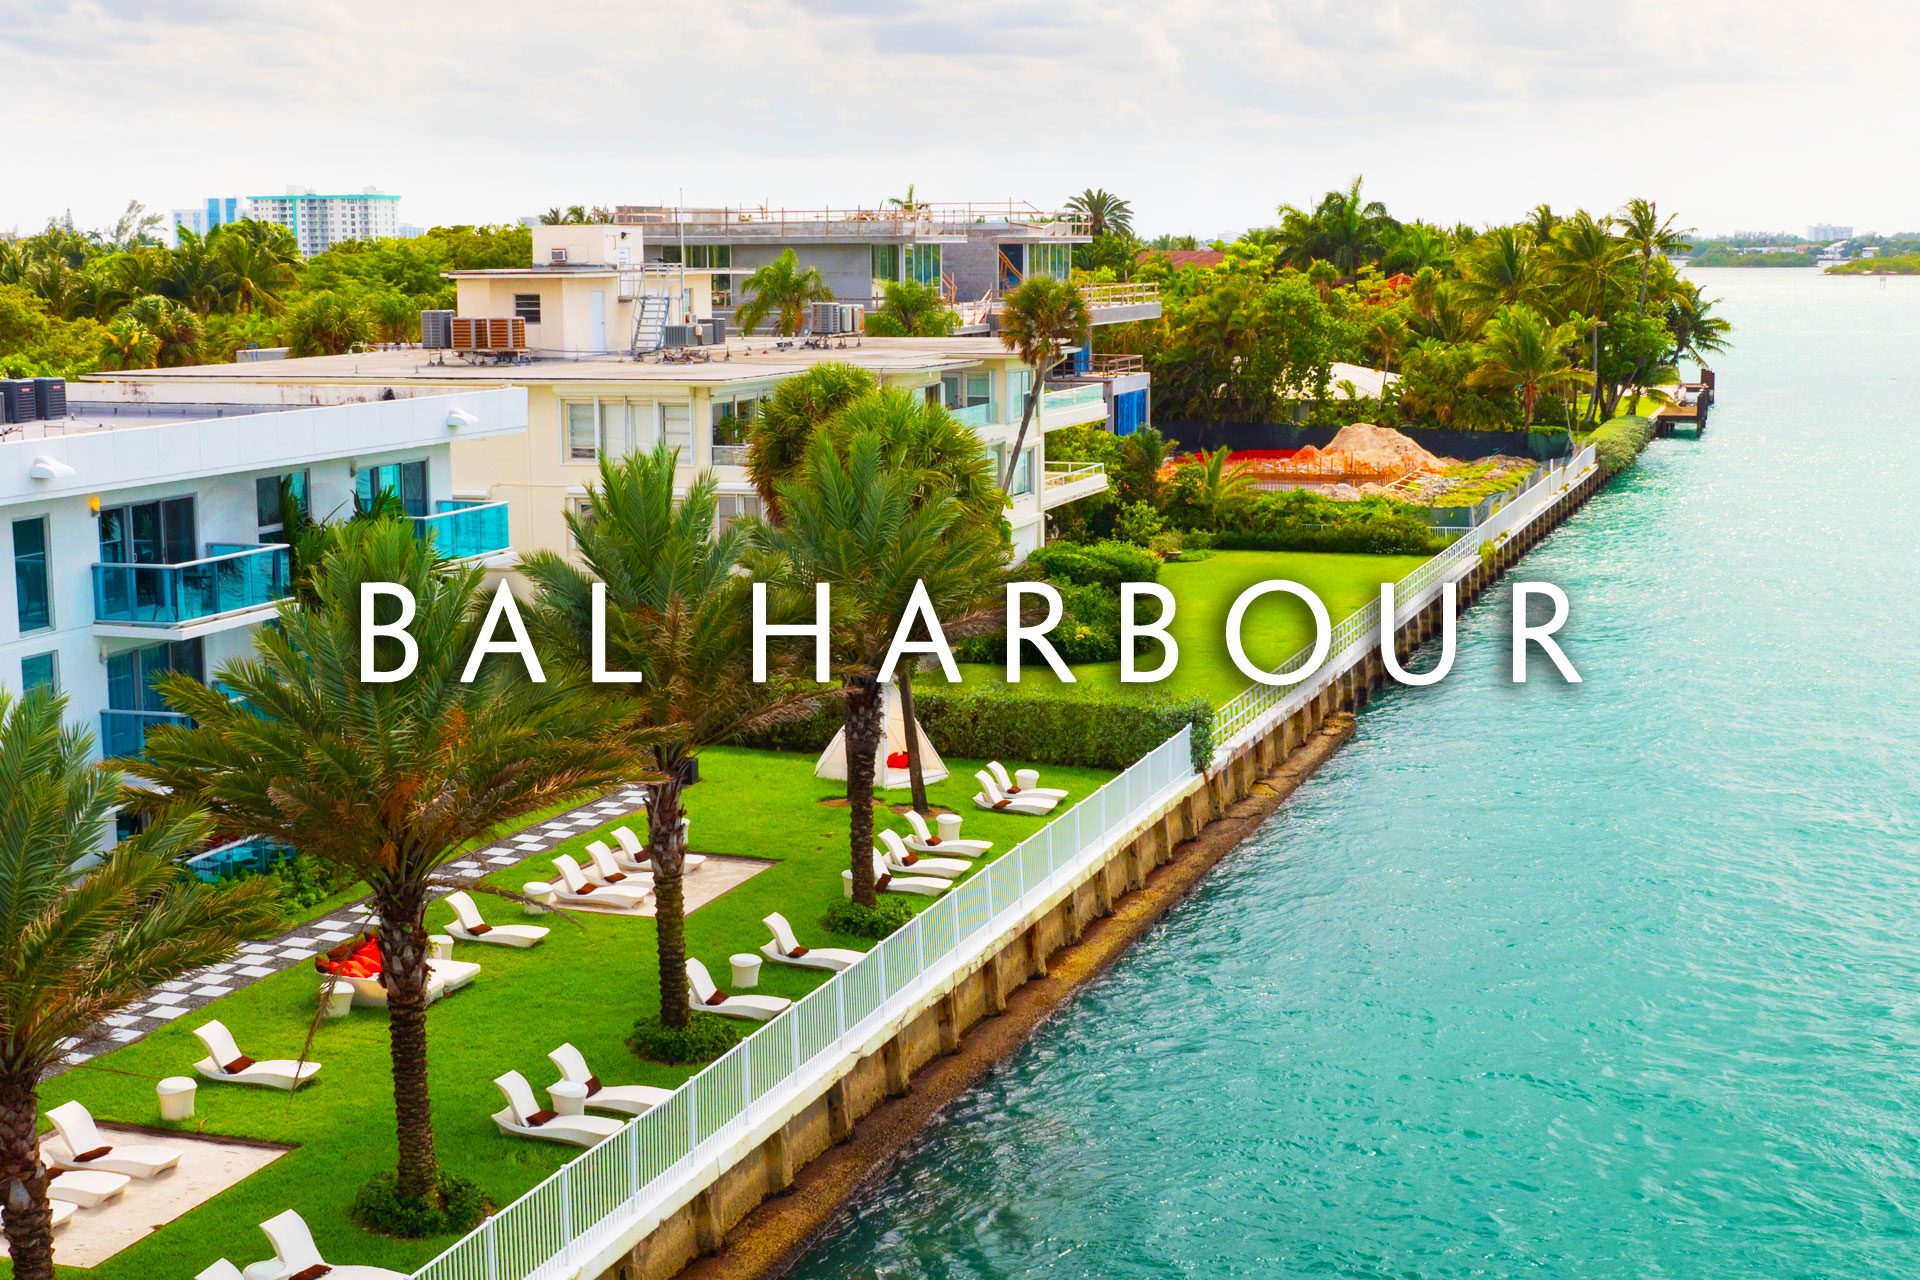 Bal Harbour Homes to Buy from Realtor D. Alex Vaughn is owner of the Vaughn Luxury Real Estate Group focusing on Real Estate in the MIami and Detroit Markets.